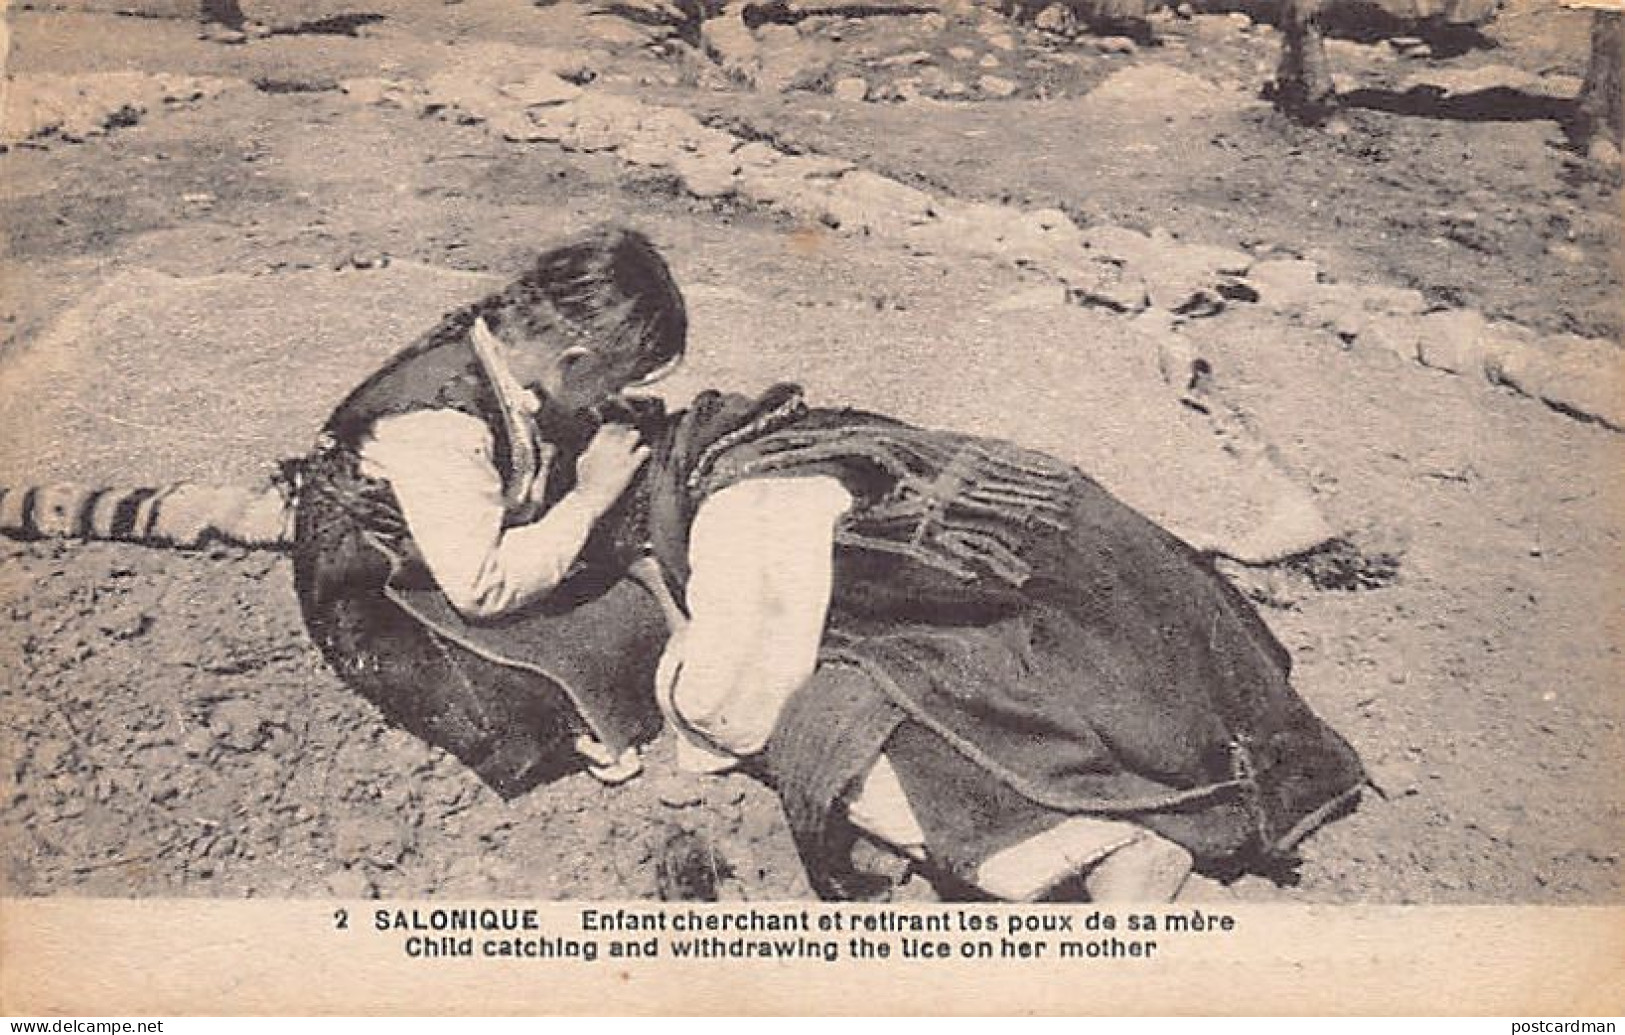 Greece - SALONICA - Child Catching The Lice On Her Mother - Publ. Papeterie Marisienne 2 - Greece